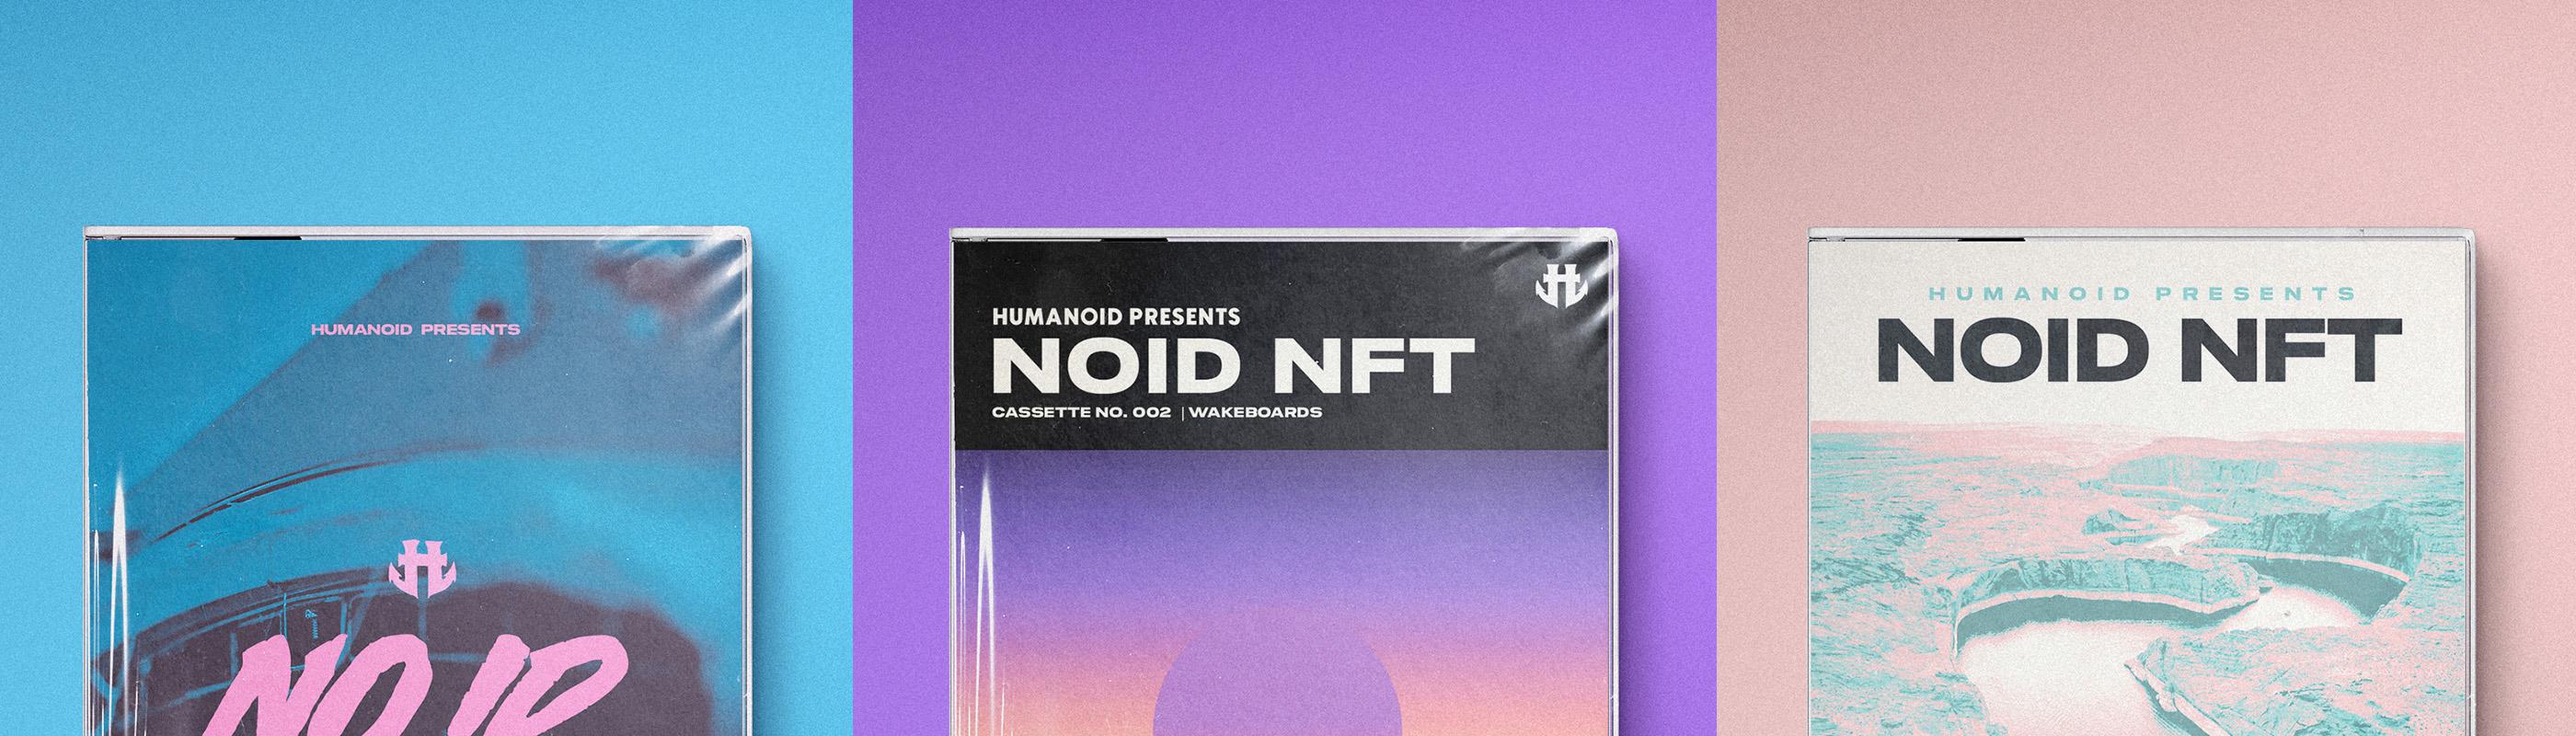 NOid NFT Cassette Collection (wakeboards)